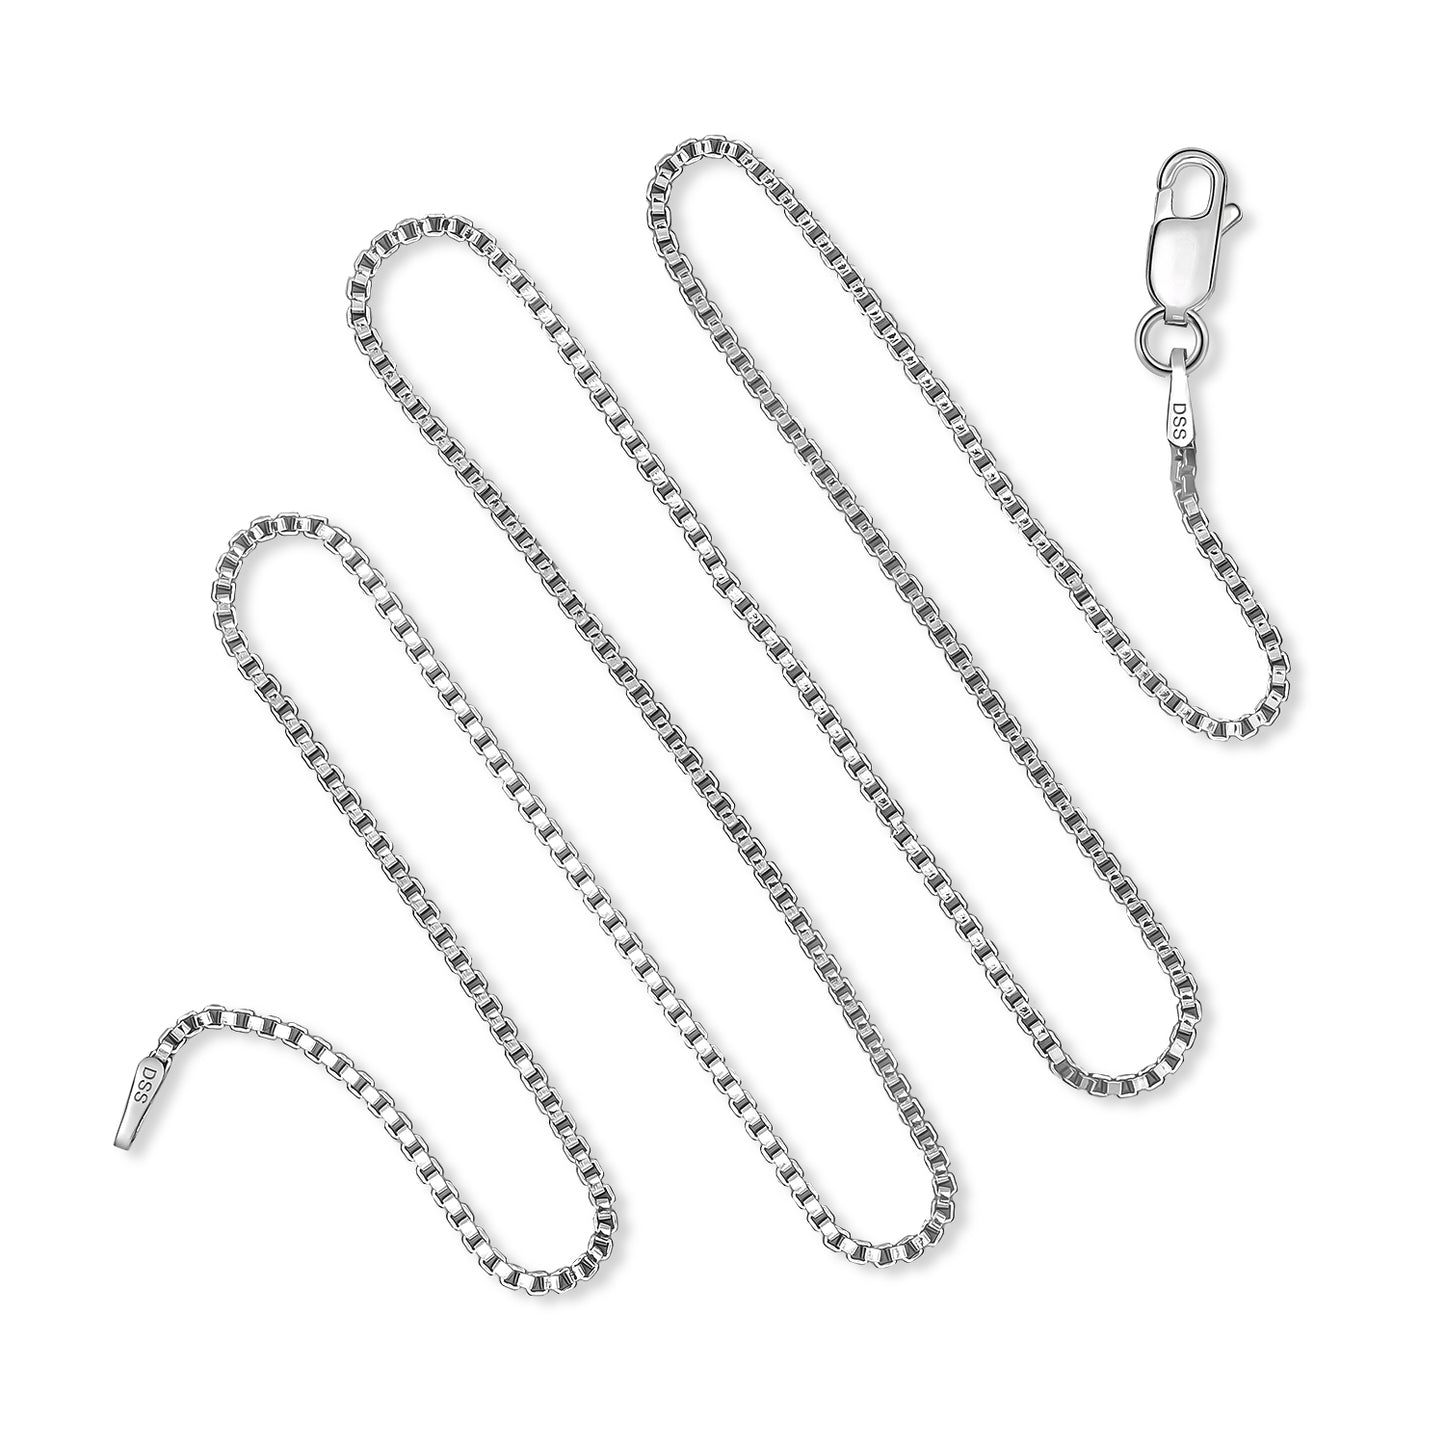 925 Sterling Silver 1.5 MM Box Chain Italian - Rhodium Plated - Lobster Claw 16 - 36 Inch. anti-tarnish. 16", 18", 20", 22", 24" 30", 36". Great for pendants, does not tarnish.